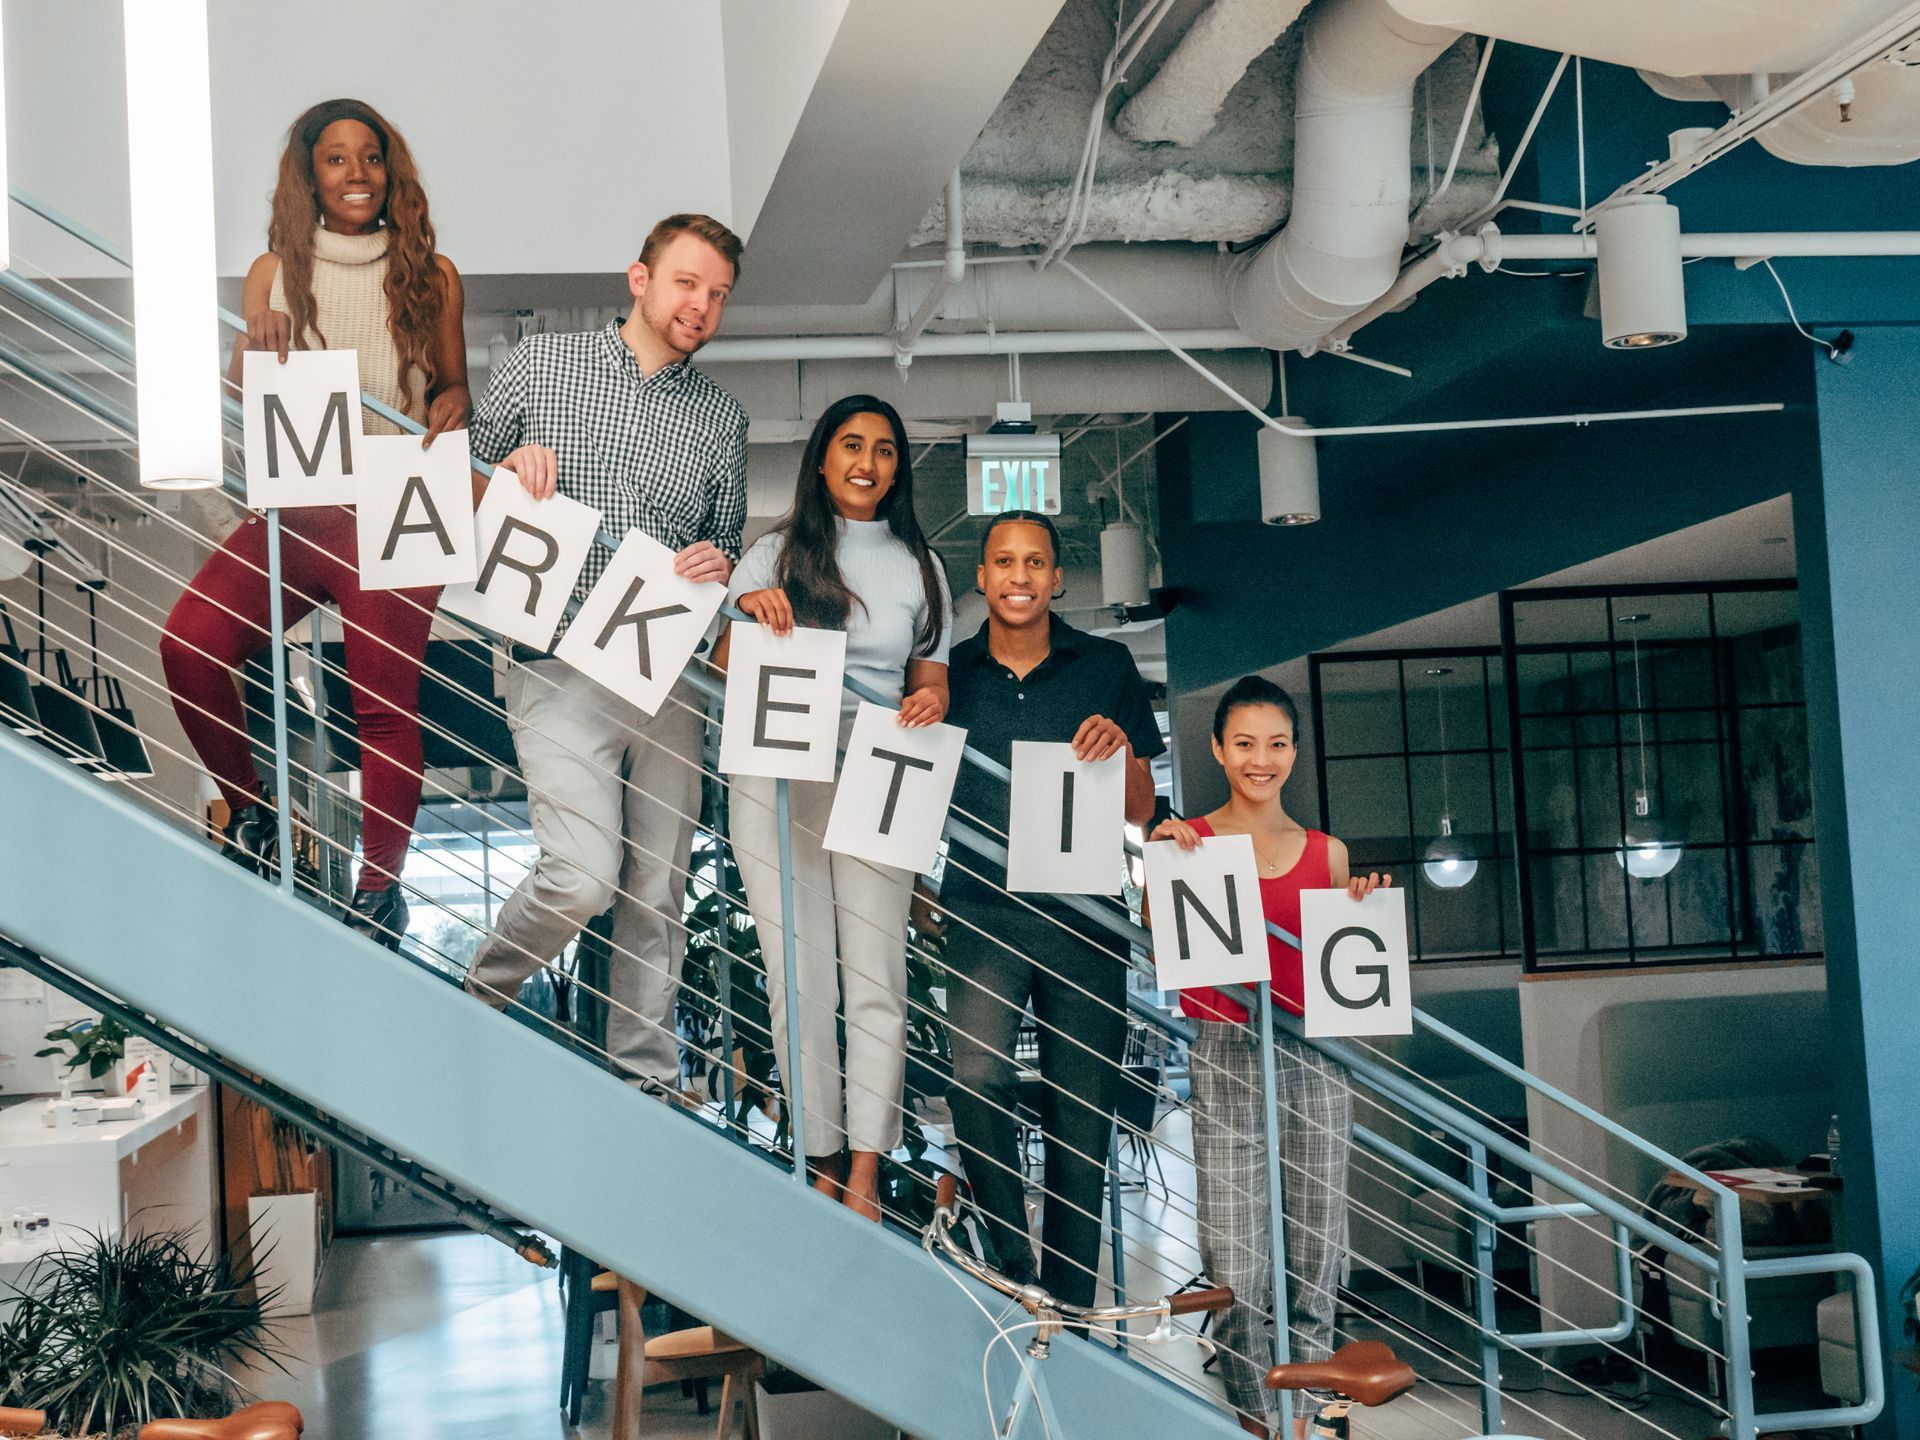 a group of people are standing on a set of stairs holding signs that say marketing .